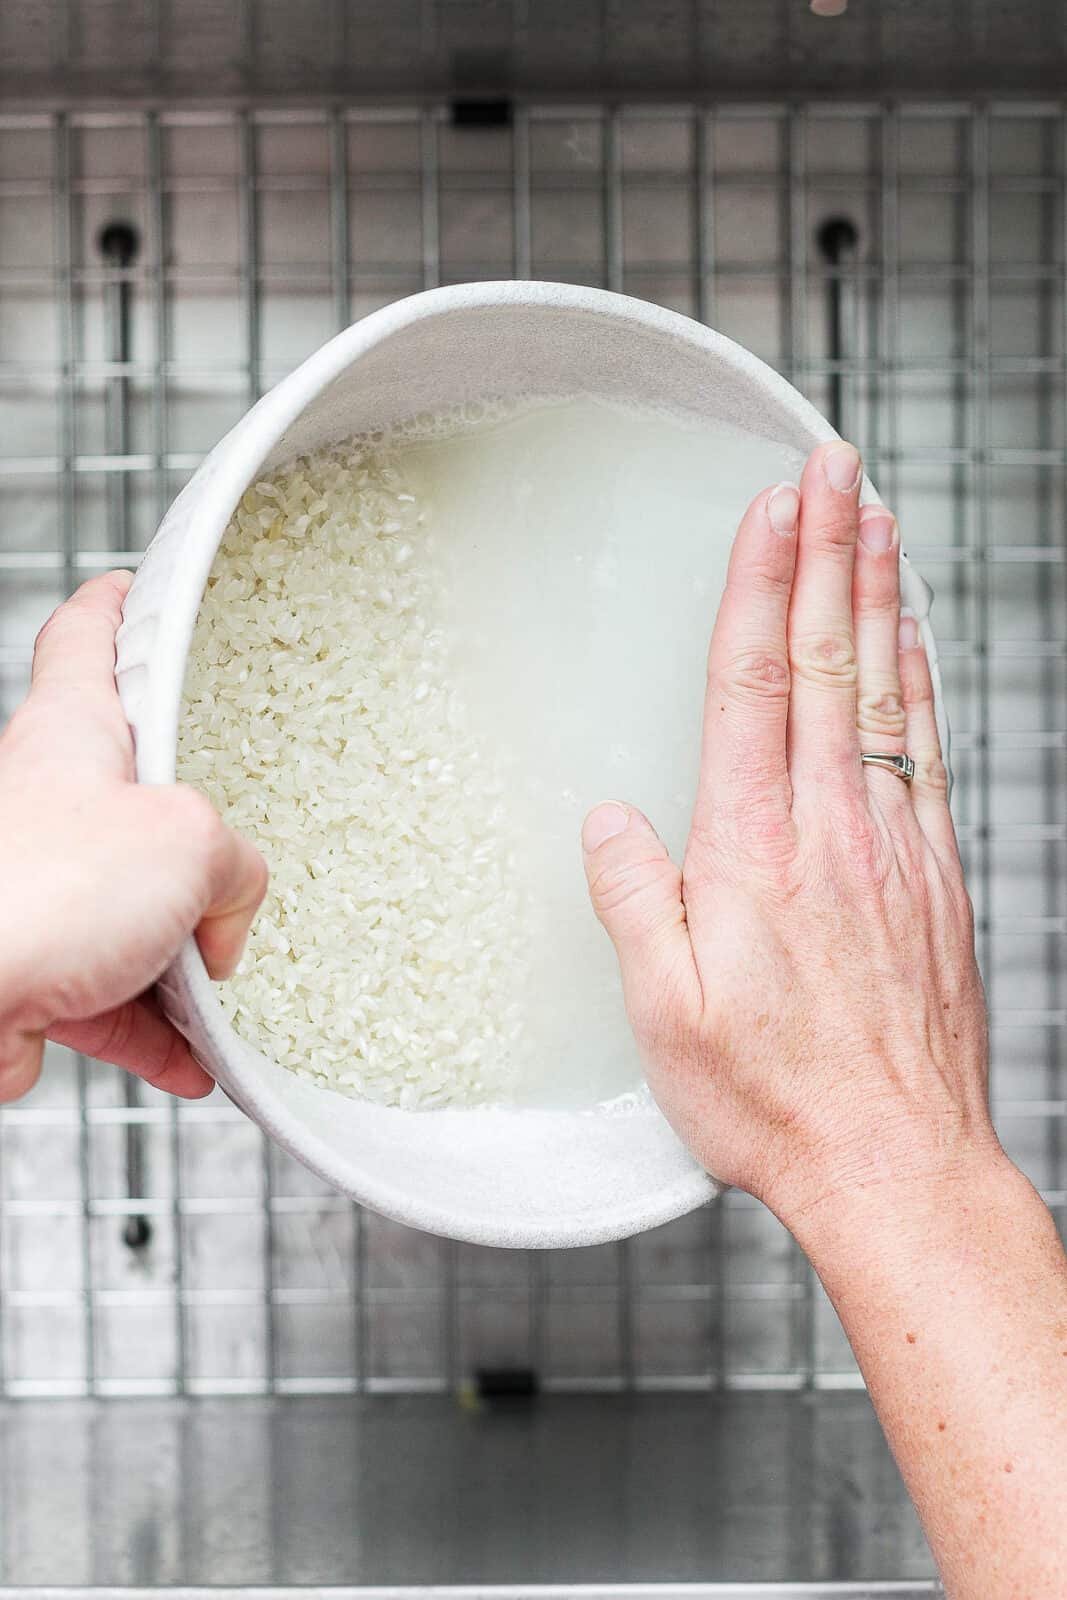 Water being drained out of the bowl with the rice staying in the bowl.